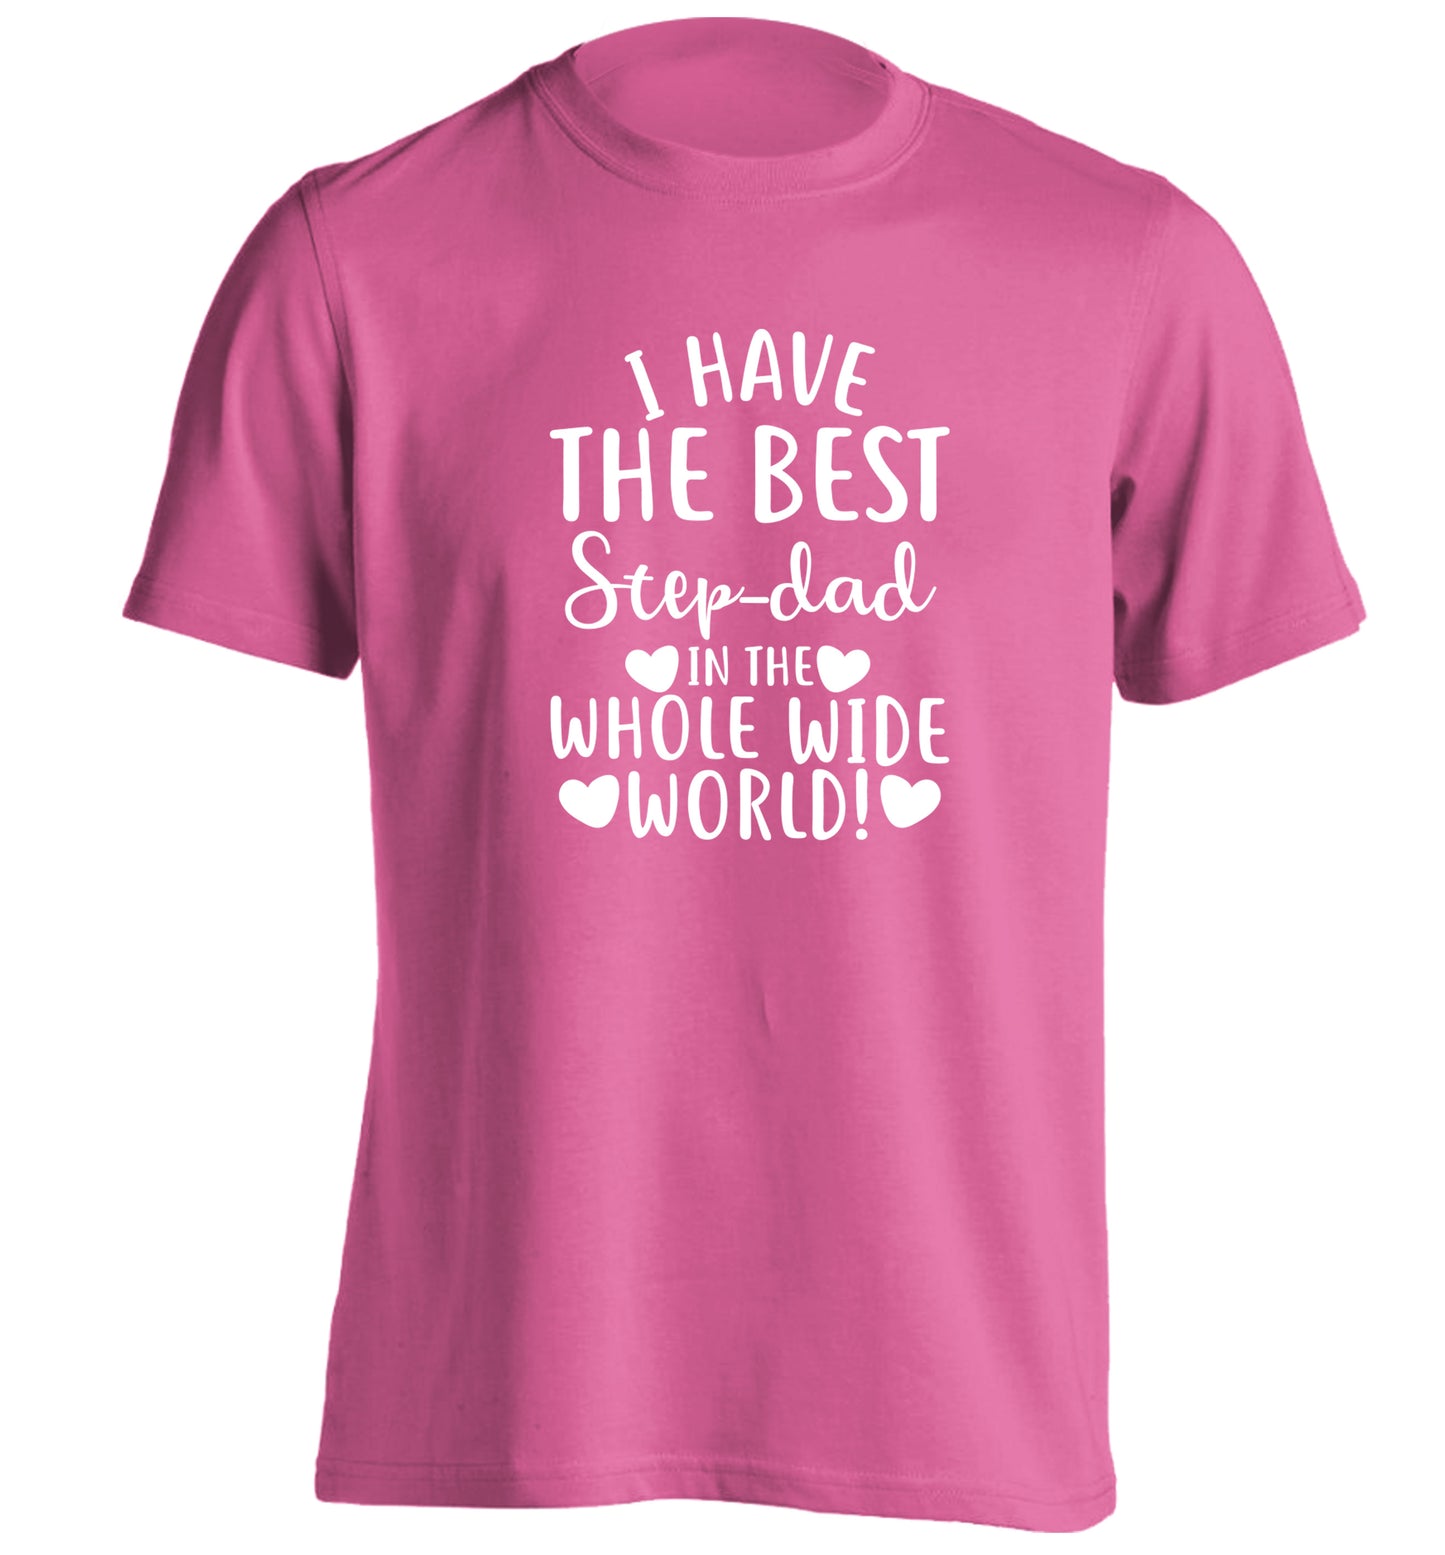 I have the best step-dad in the whole wide world! adults unisex pink Tshirt 2XL